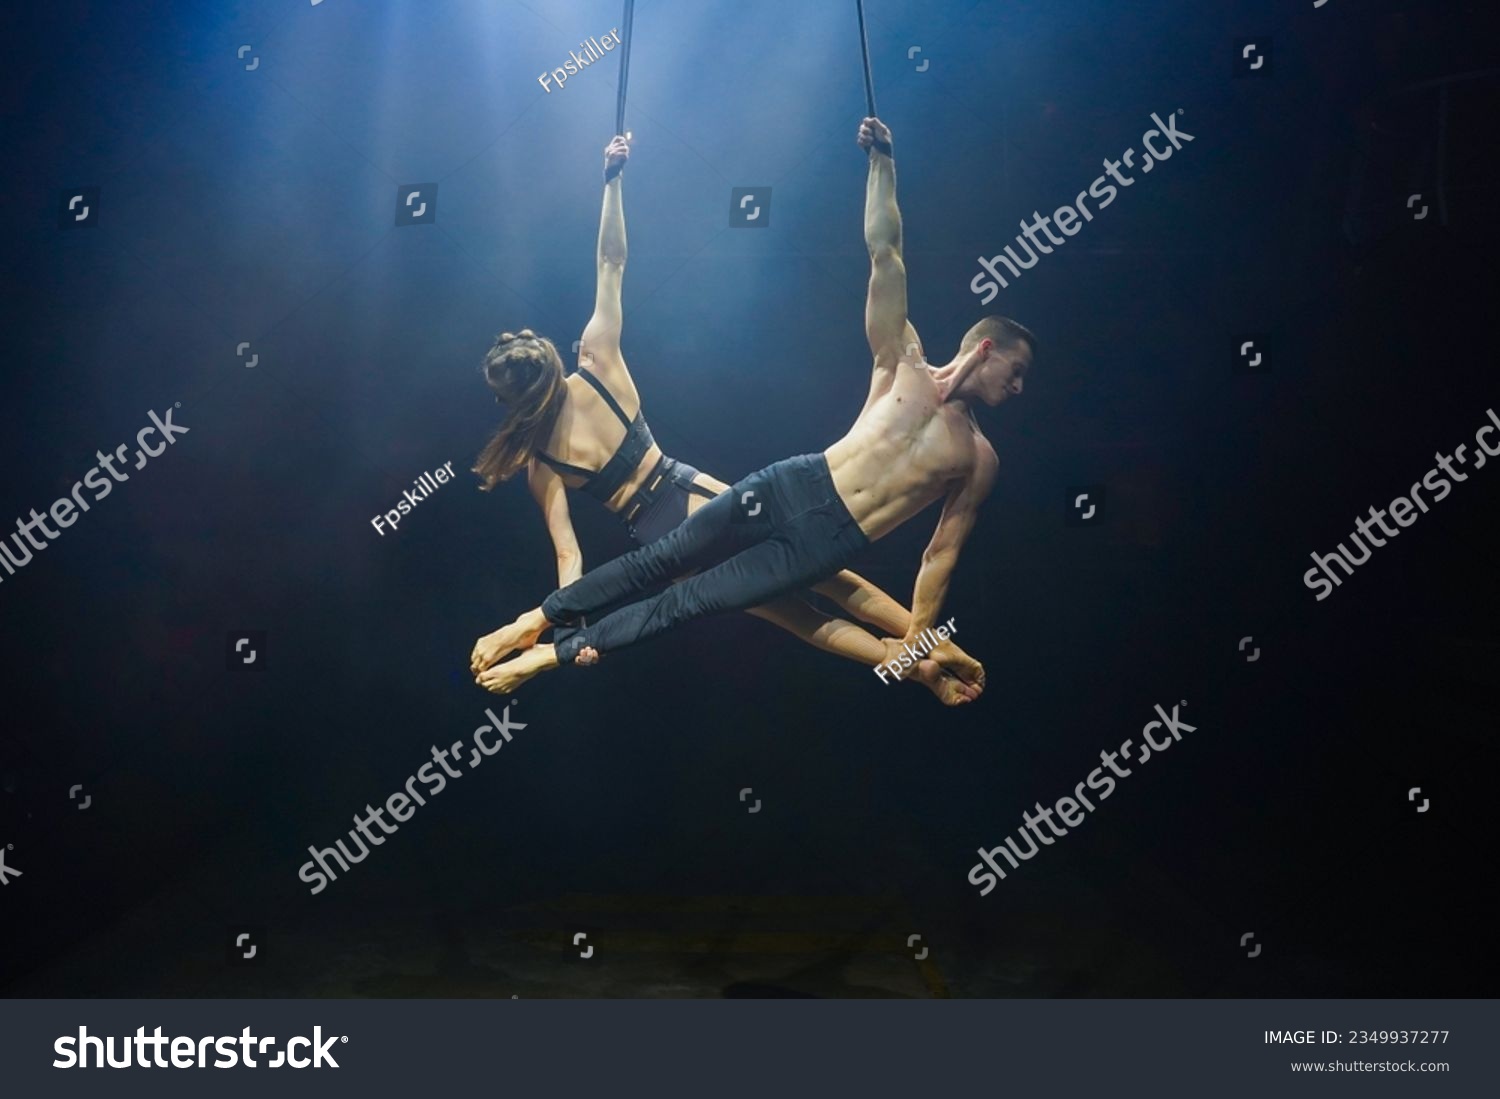 Aerial straps duo performance: a man and woman execute graceful acrobatic feats in mid-air against a black background, dressed in black and illuminated by a white-blue glow #2349937277